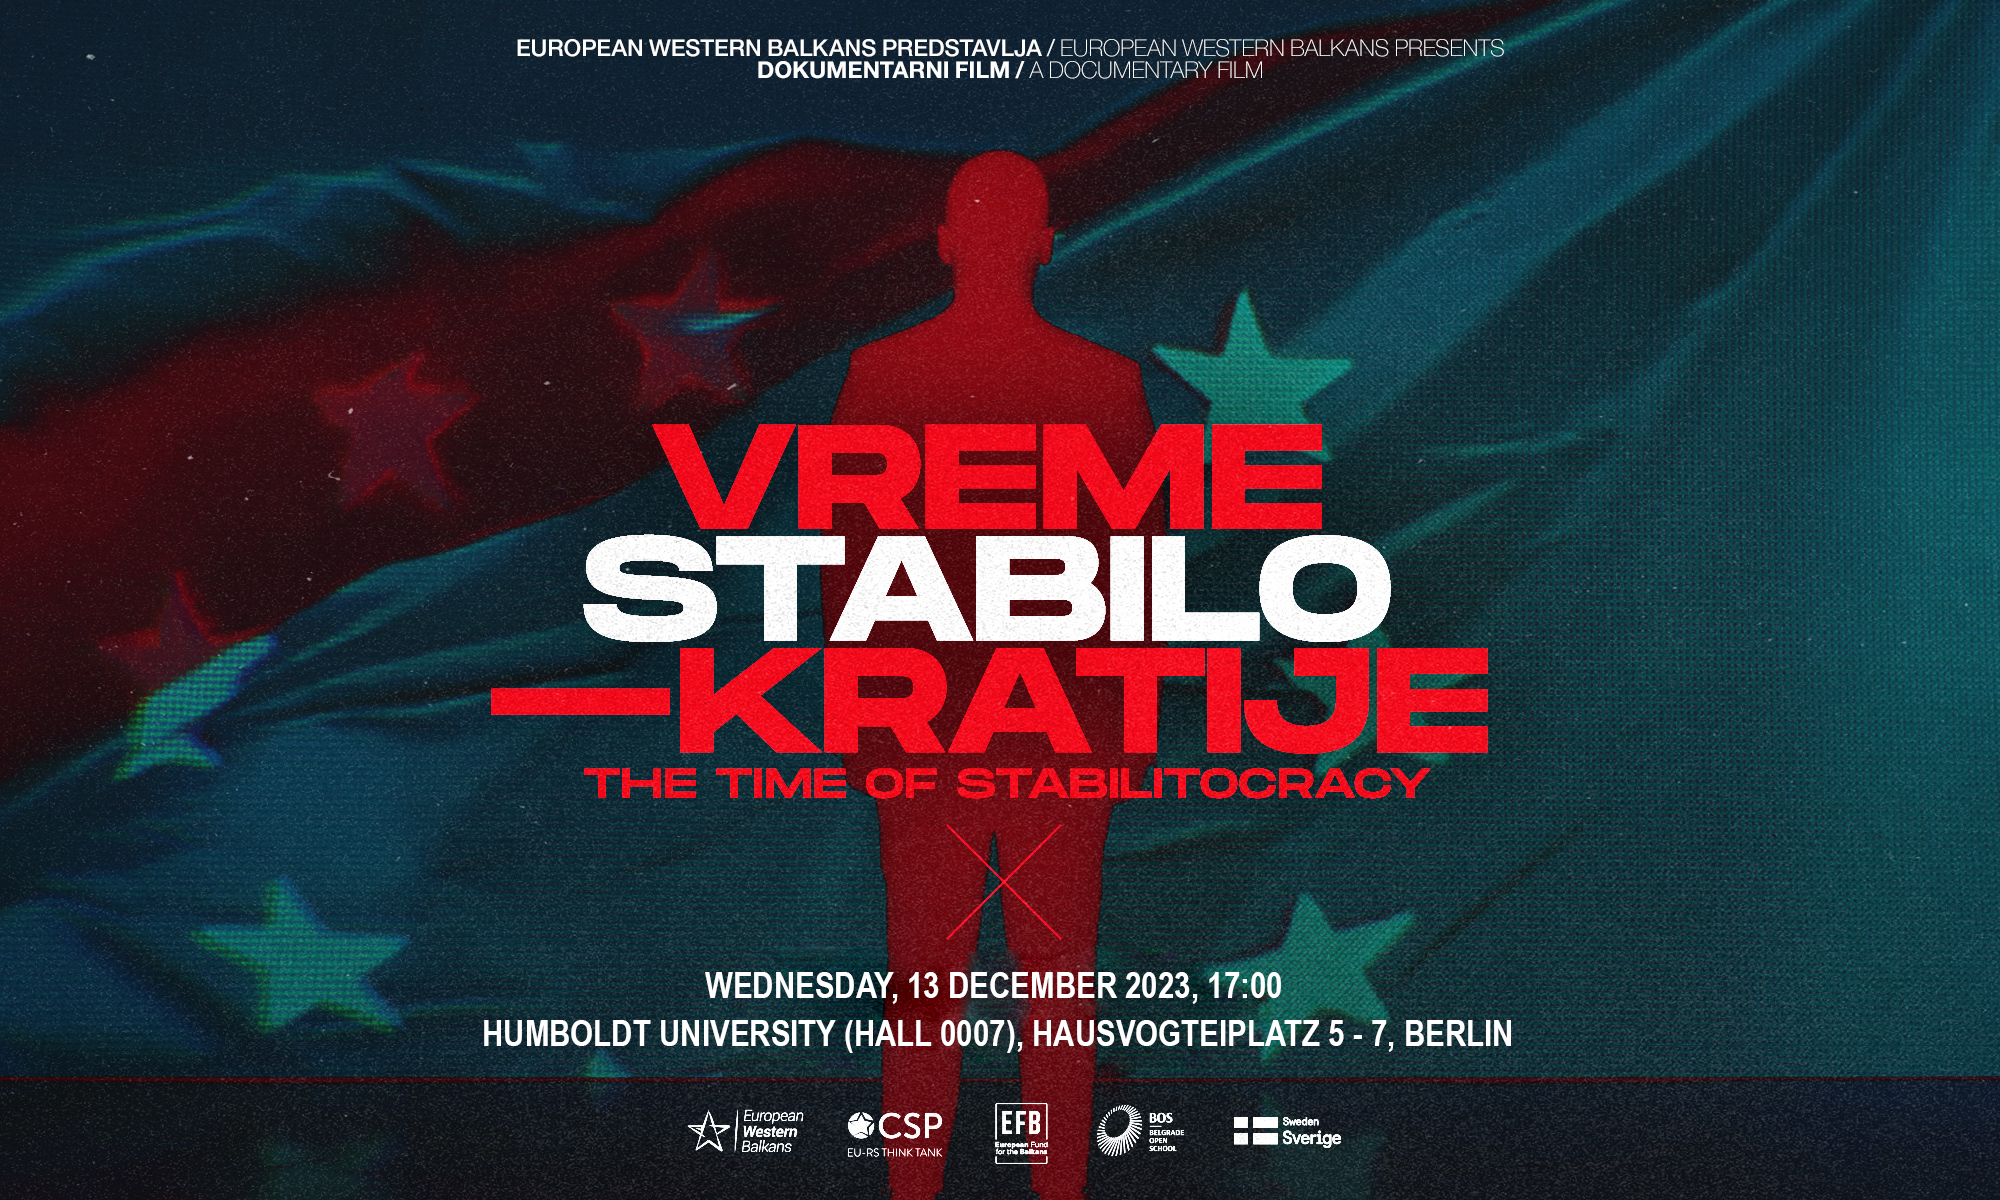 Screening of the documentary The Time of Stabilitocracy in Berlin, December 13